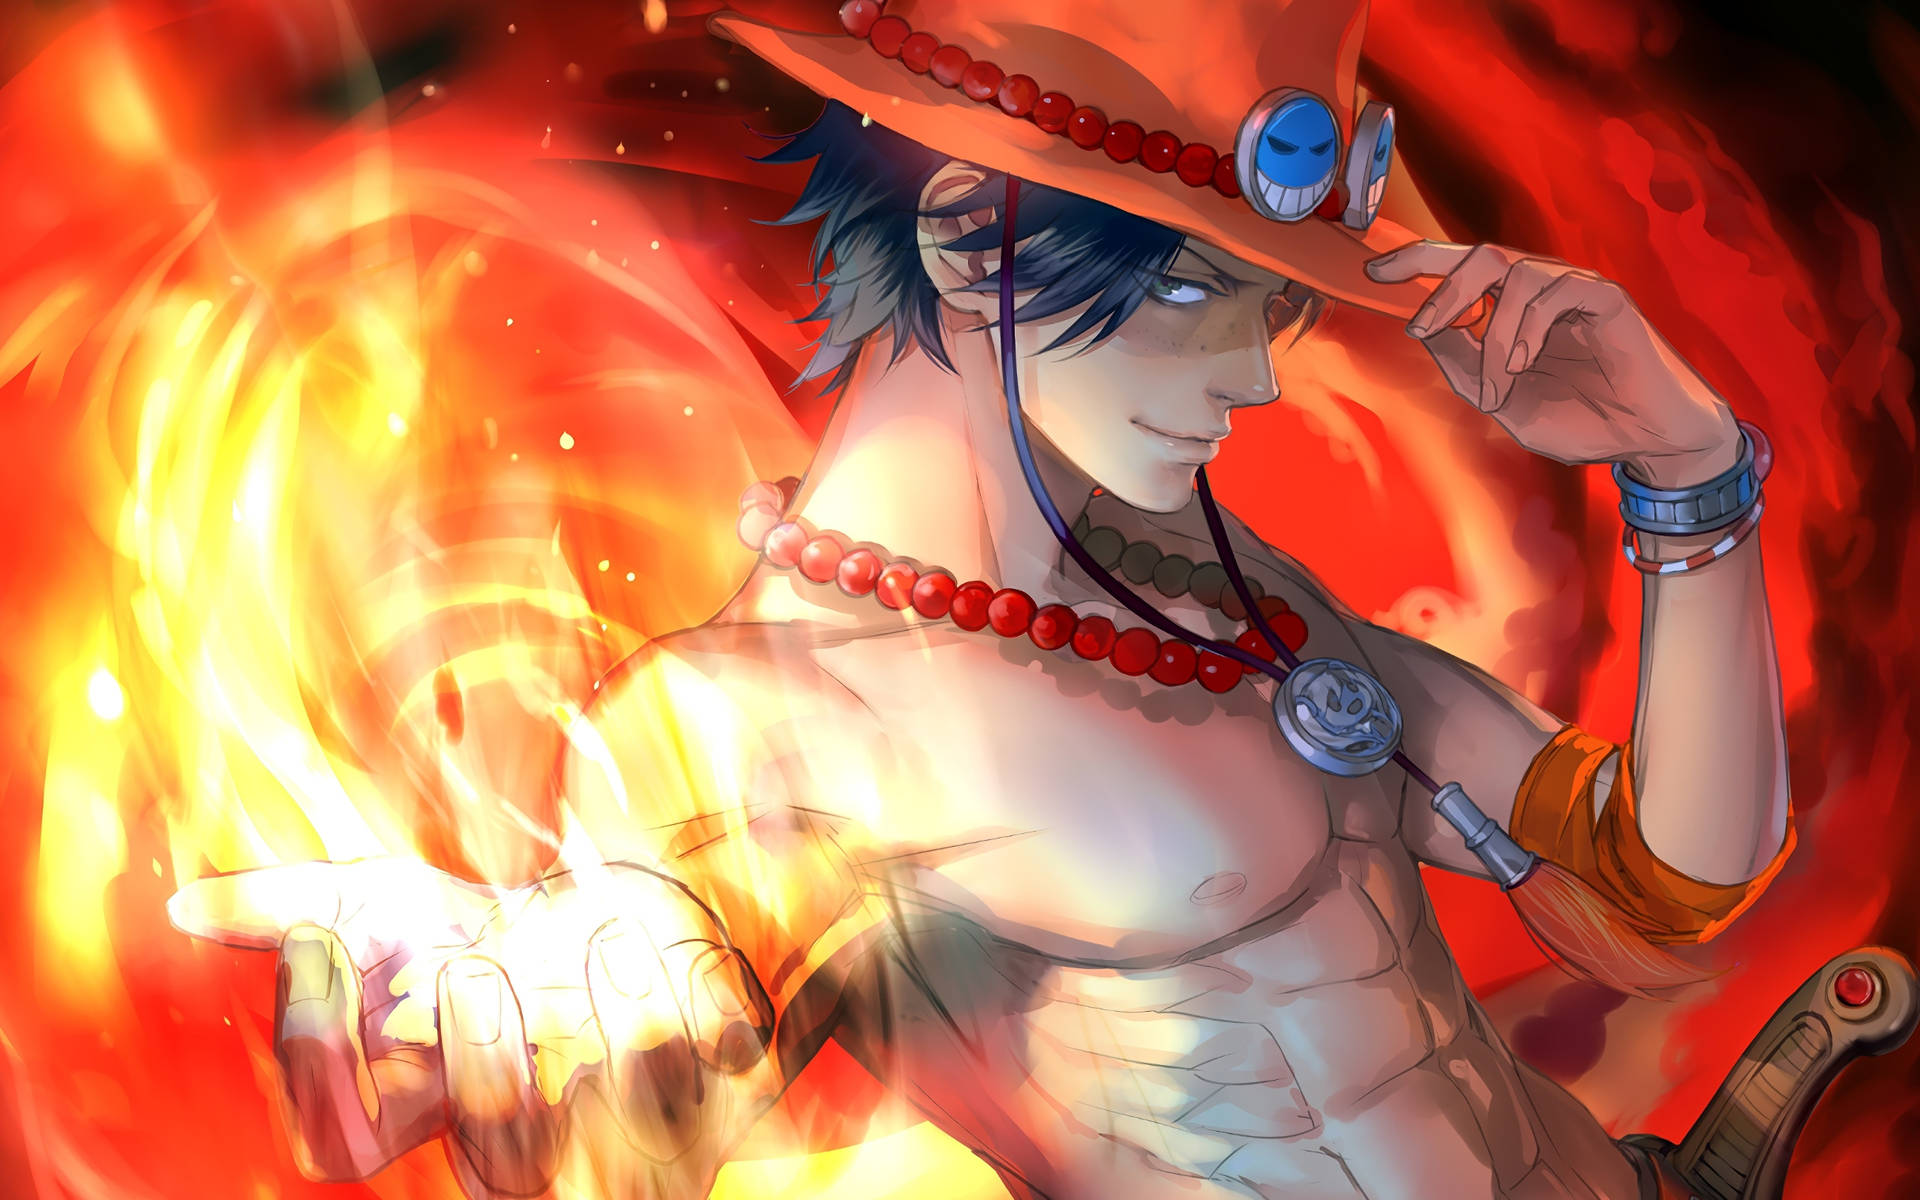 Download Dope Anime Fire Fist Ace Wallpaper